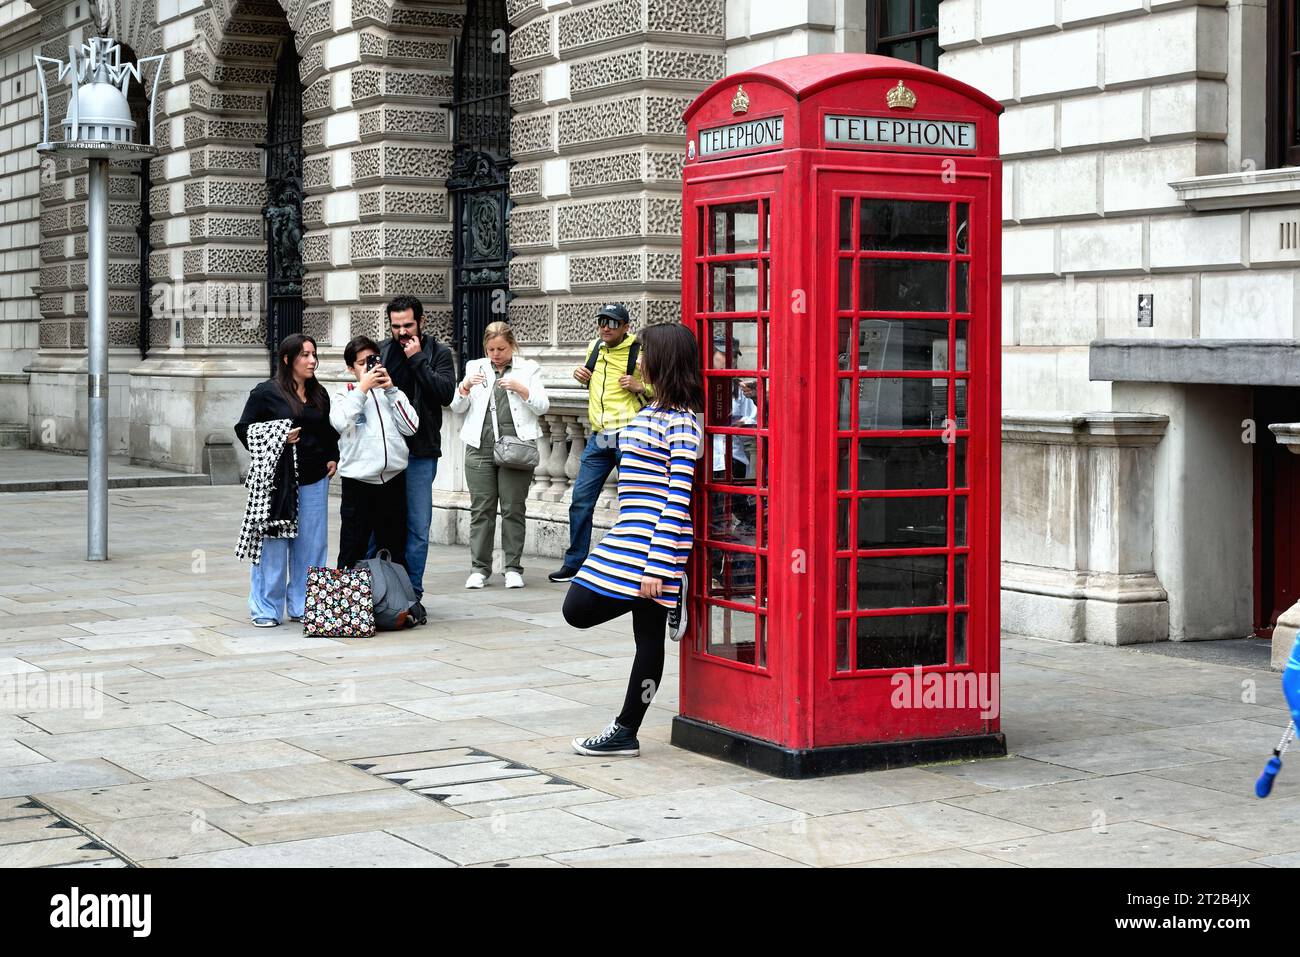 A group of Asians tourists taking photographs by an iconic British red telephone box in Parliament Square Central London England UK Stock Photo